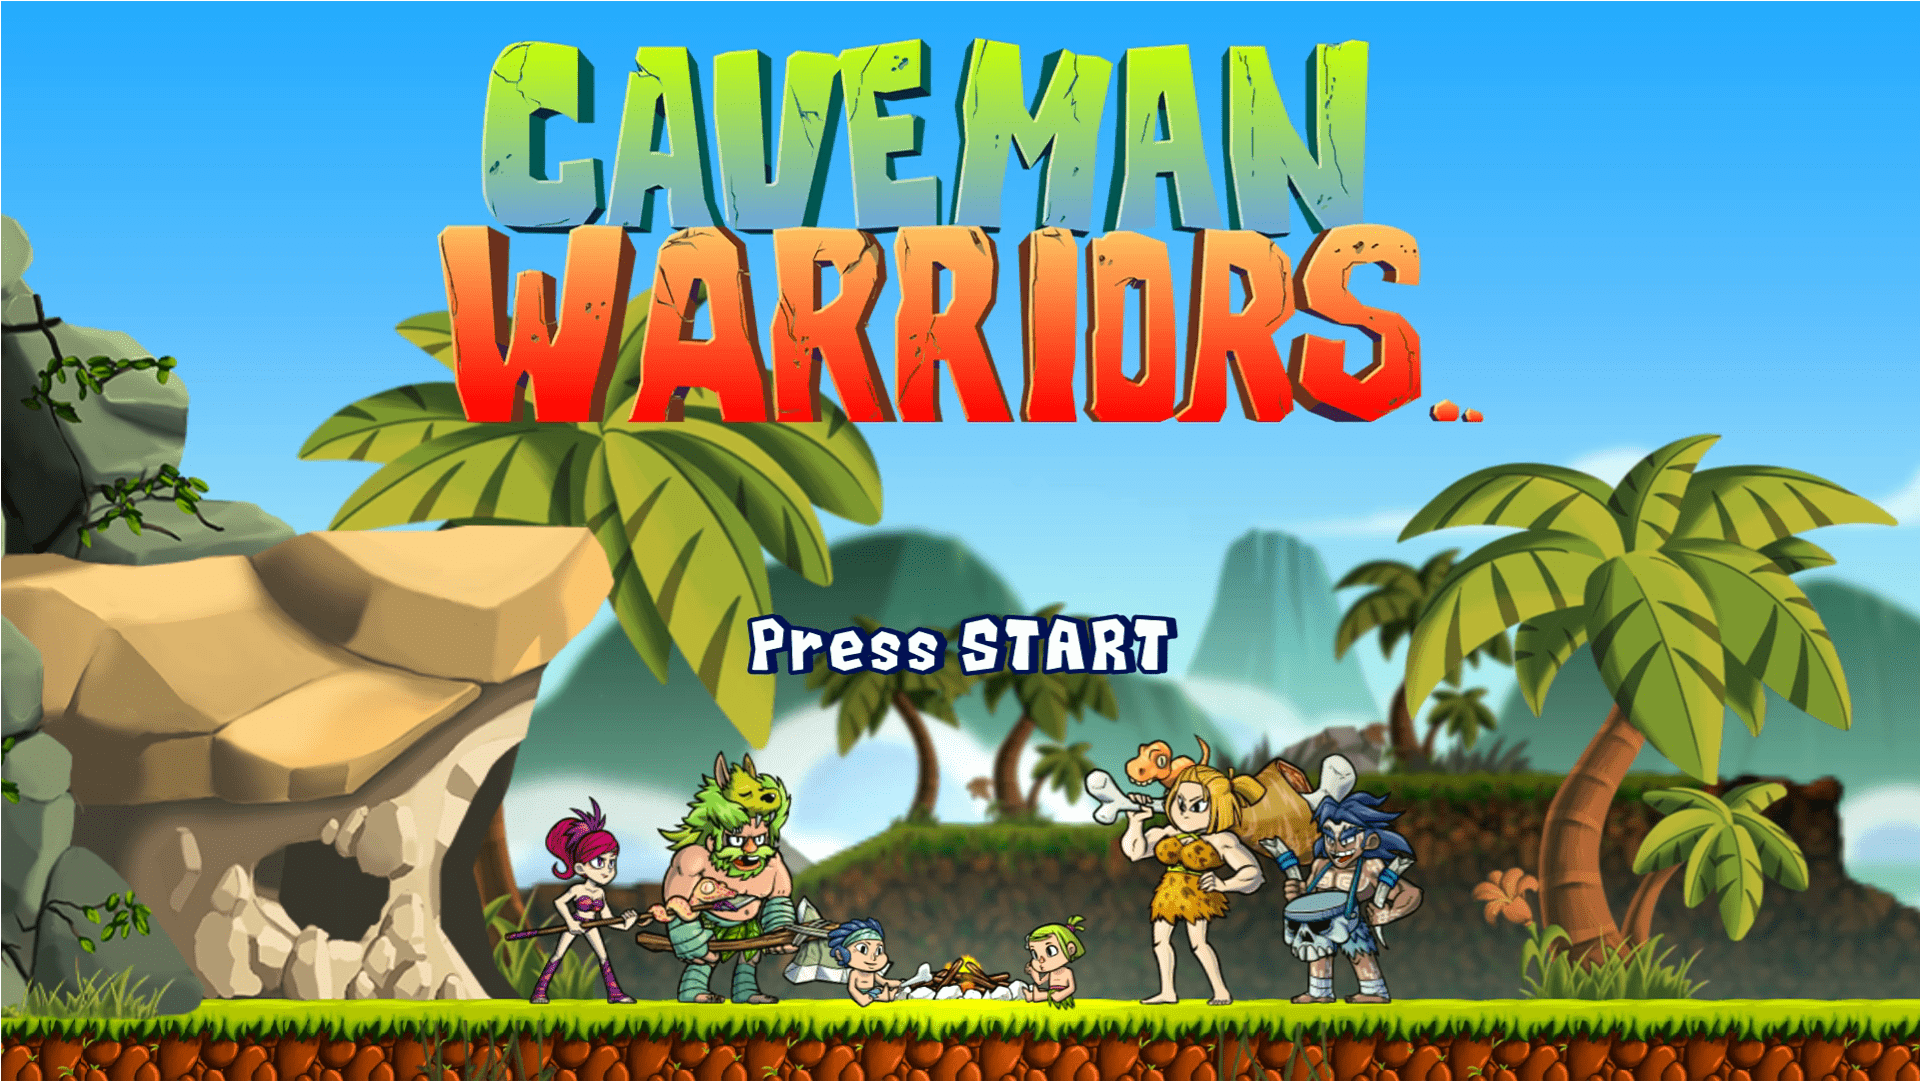 Those lovable ‘Caveman Warriors’ have been funded on Kickstarter